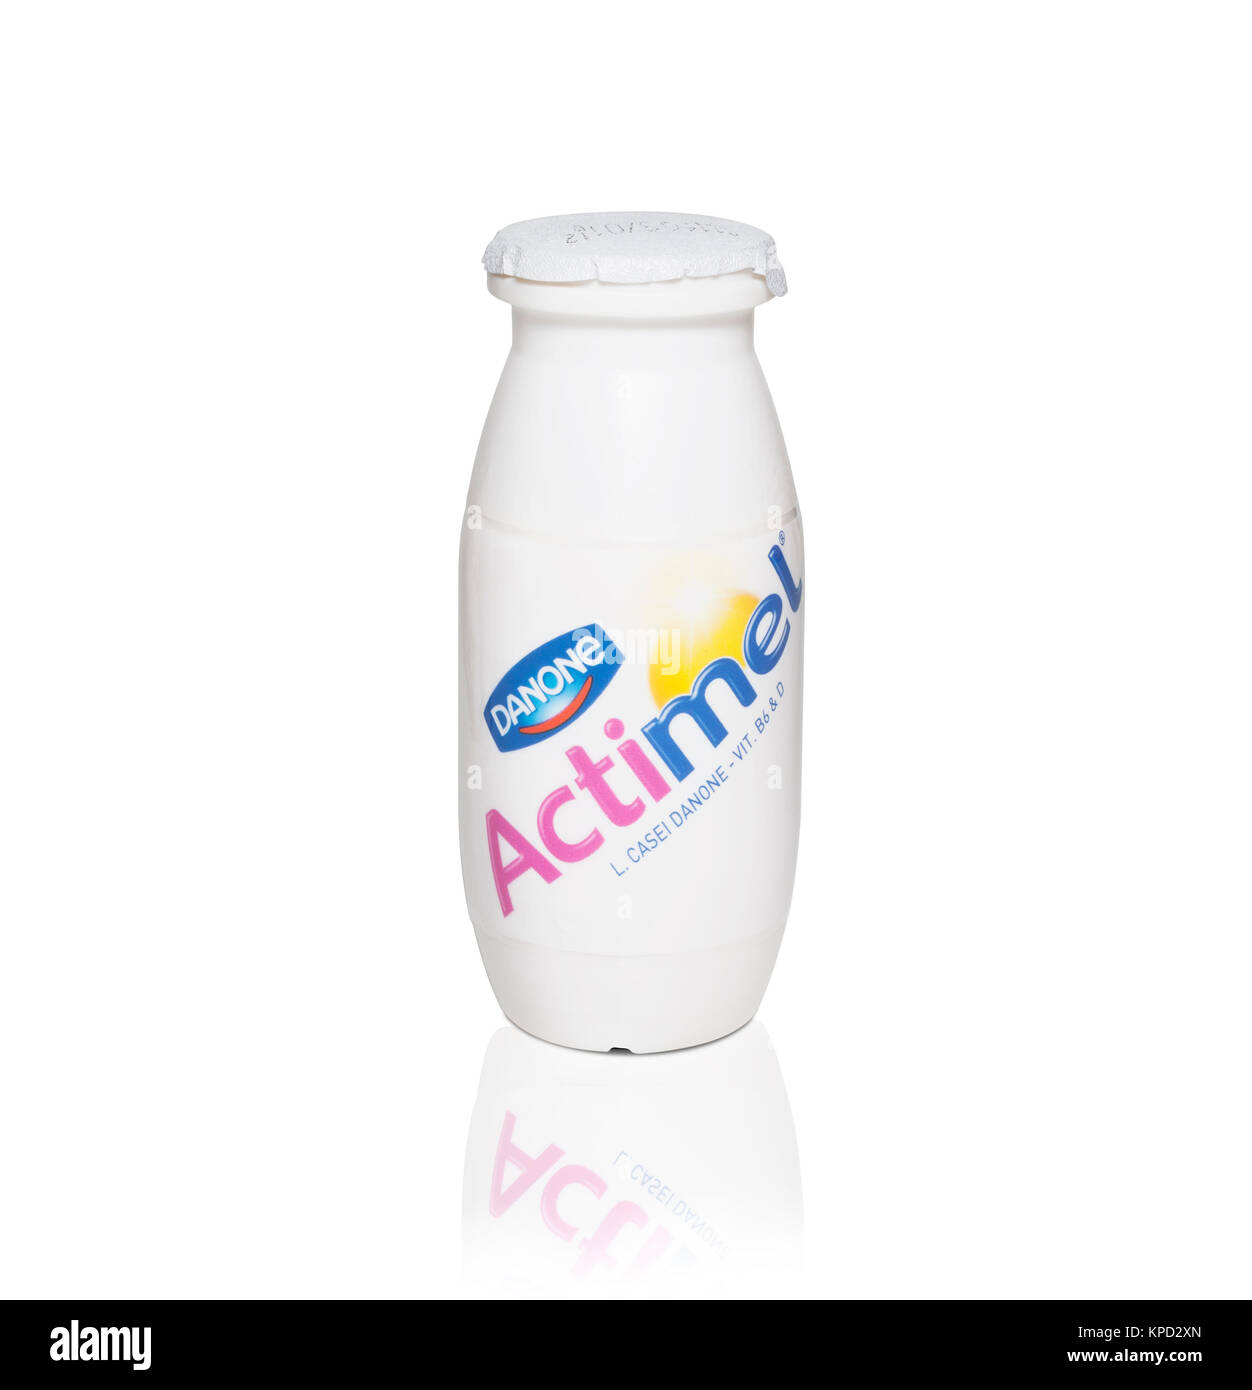 Actimel is a 'probiotic' yogurt-type drink produced by the Frenc